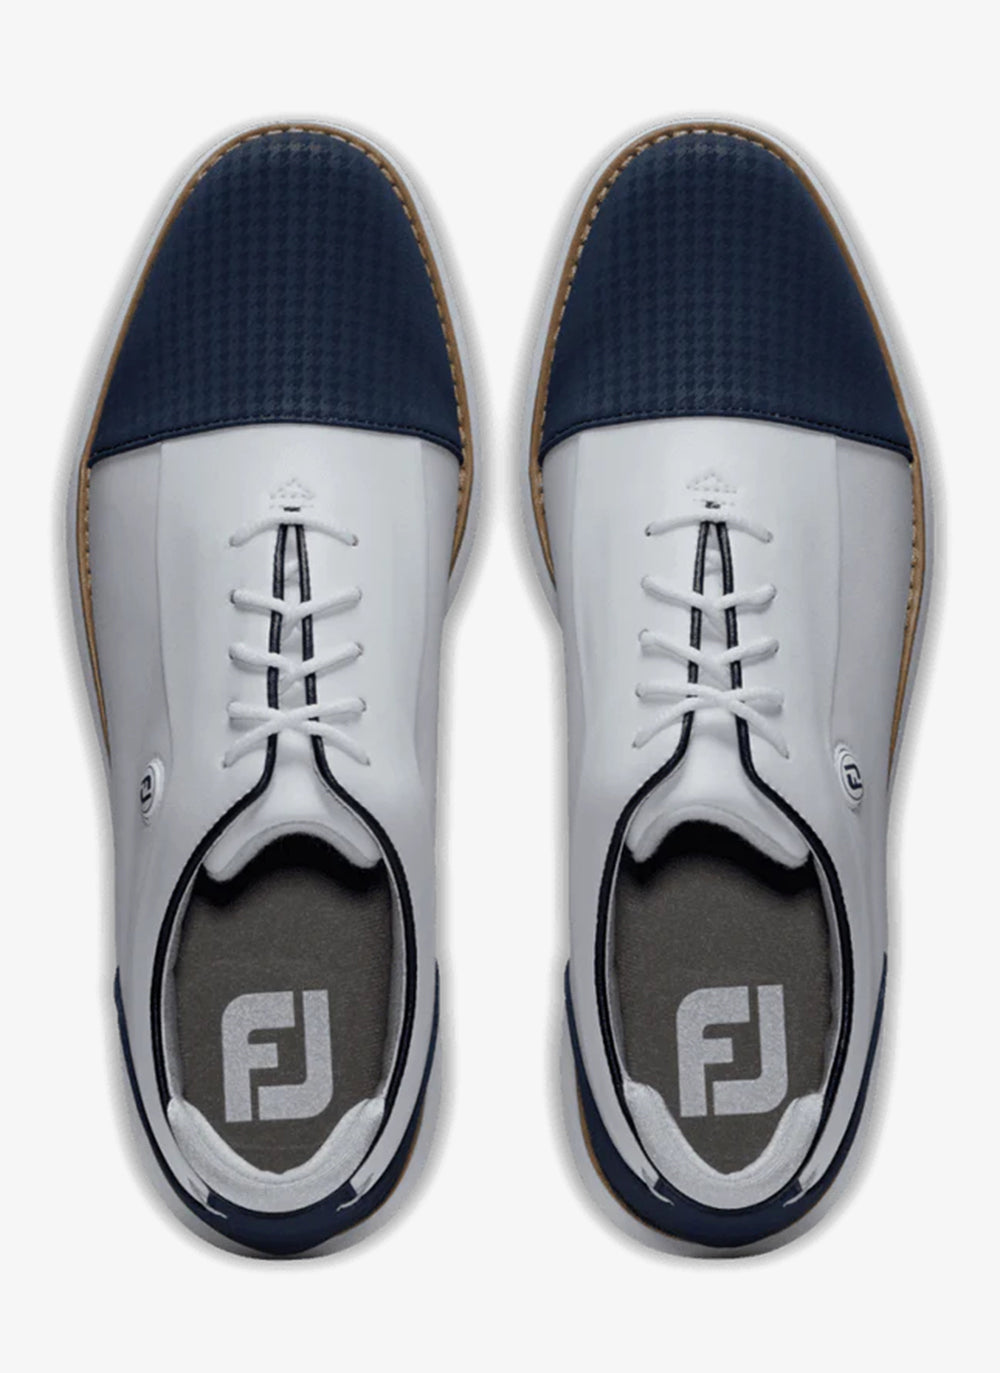 FootJoy Ladies Traditions Golf Shoes 97915